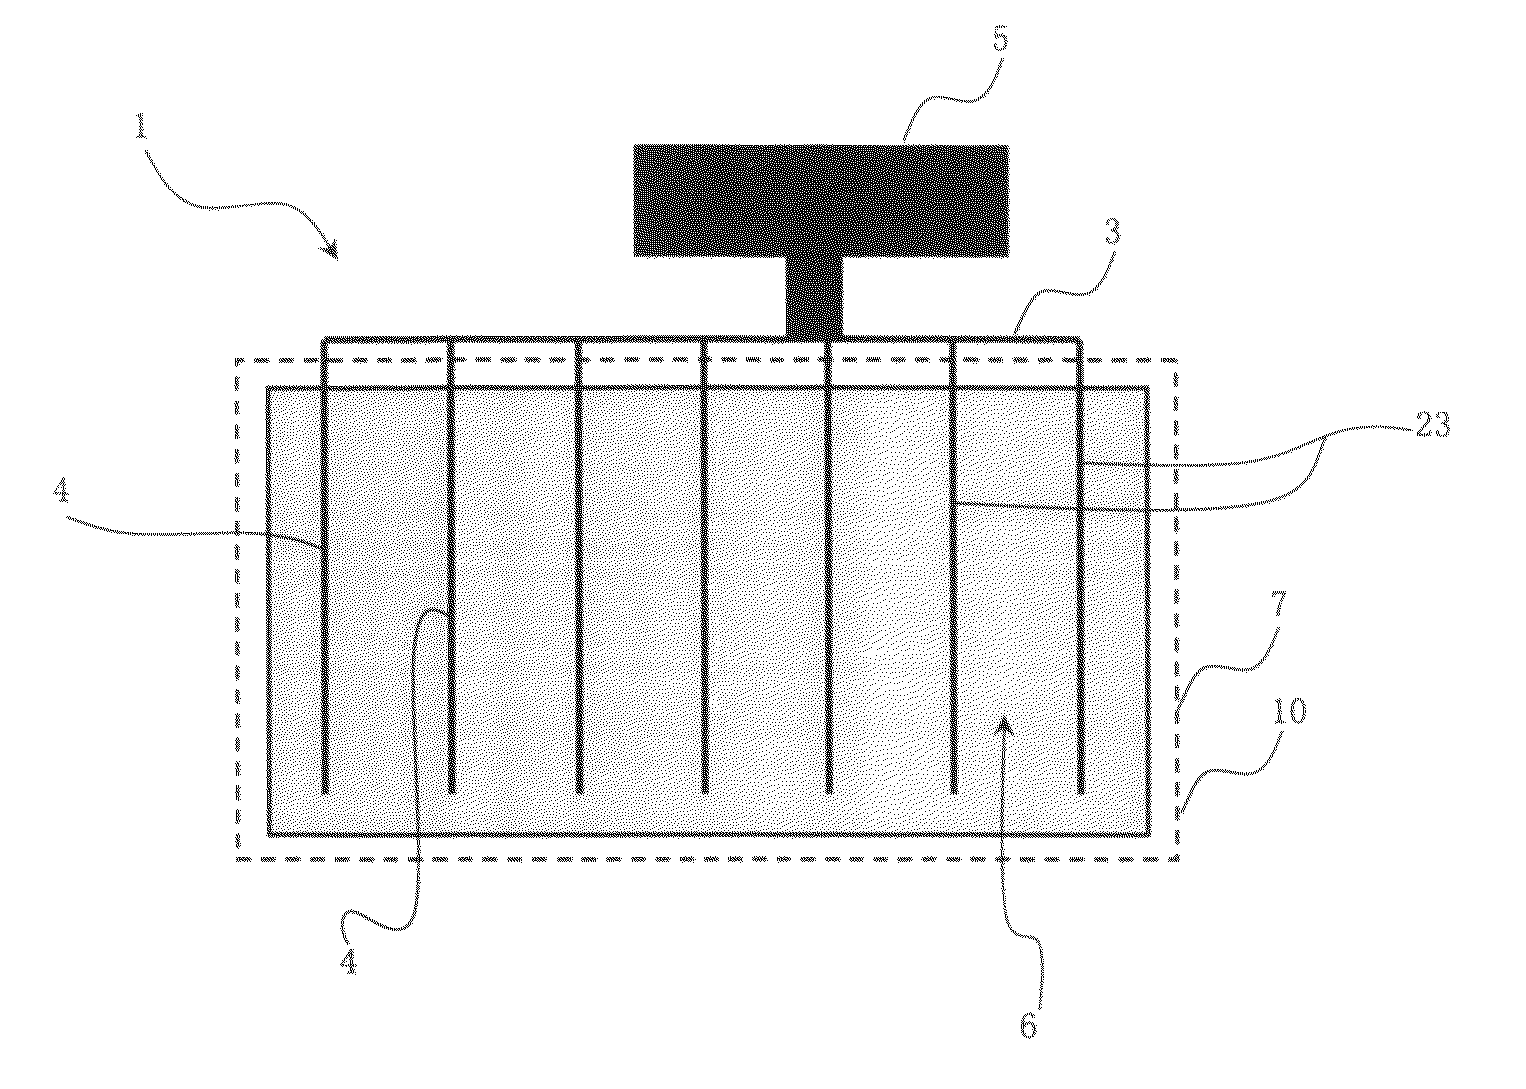 Antenna network for passive and active signal enhancement